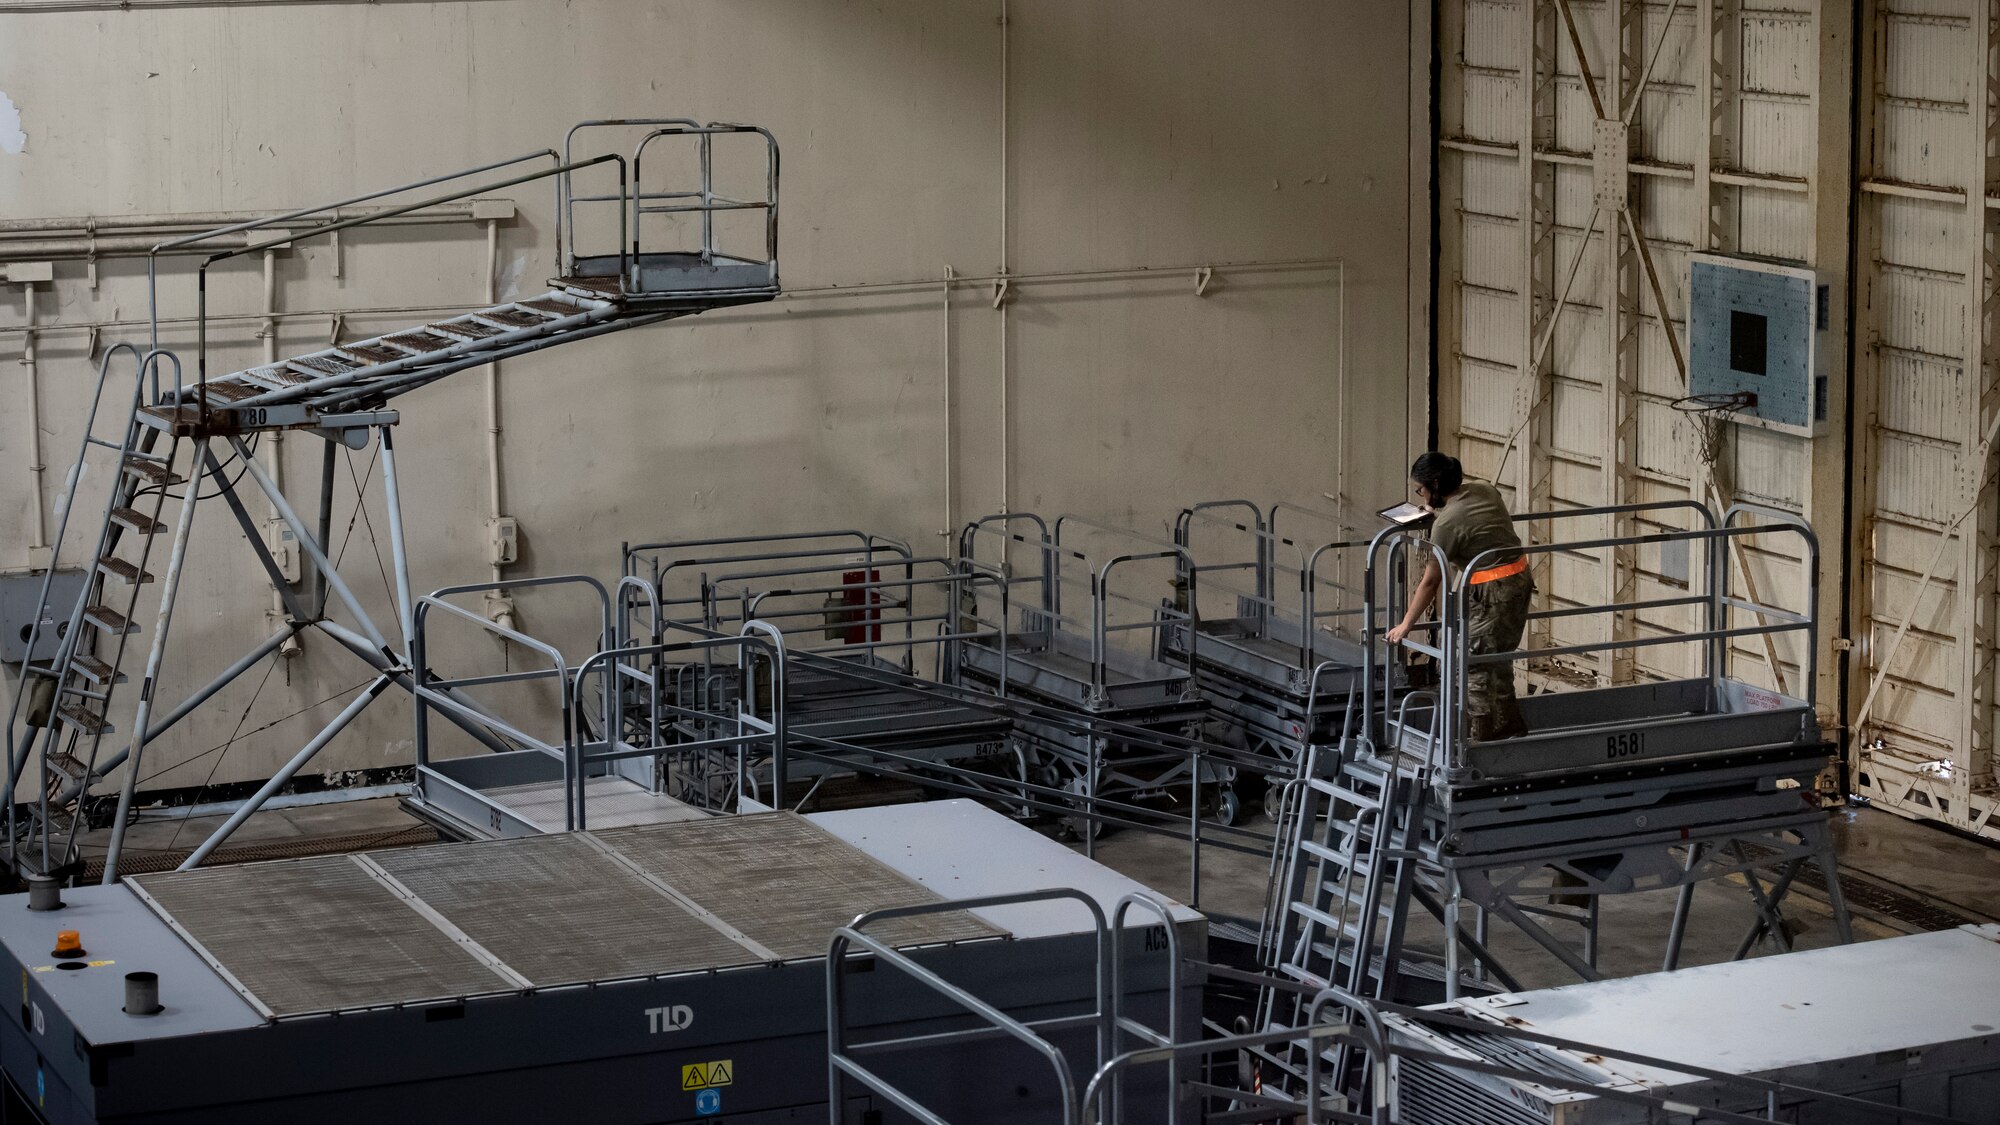 Airmen of the 18th Equipment Maintenance Squadron aerospace ground equipment flight work behind the scenes to ensure their inventory of equipment is ready for use on the flight line for maintenance operations and sortie support.